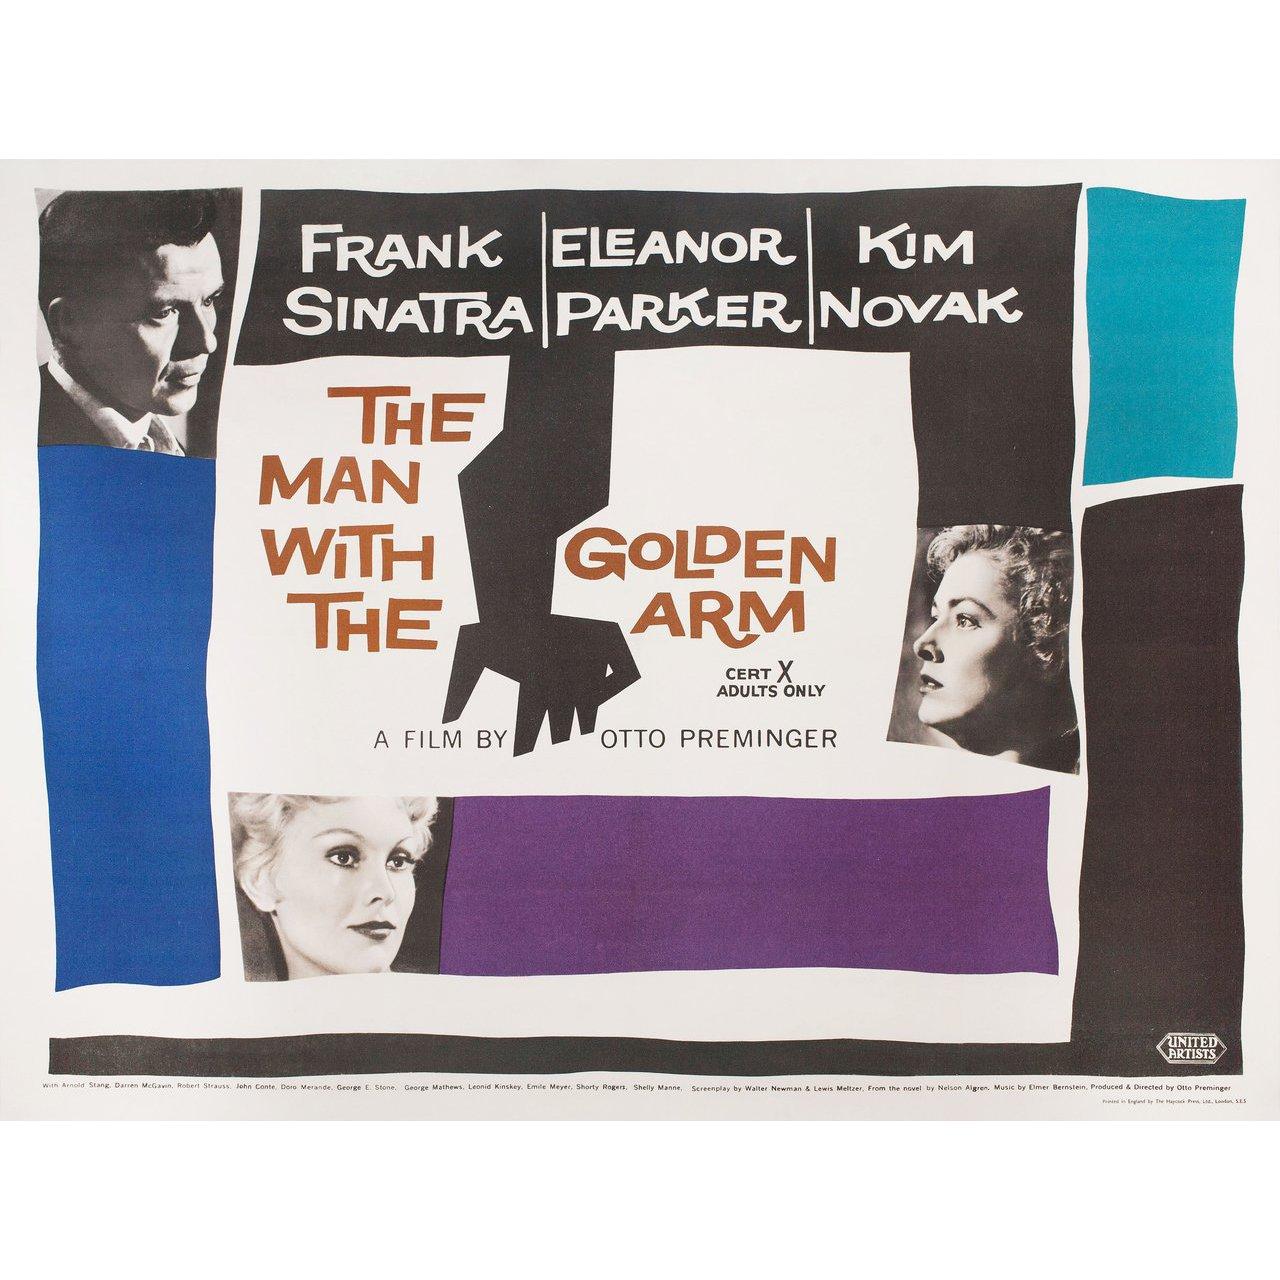 Original 1956 British quad poster by Saul Bass for the film The Man with the Golden Arm directed by Otto Preminger with Frank Sinatra / Eleanor Parker / Kim Novak / Arnold Stang. Fine condition, linen-backed. This poster has been professionally